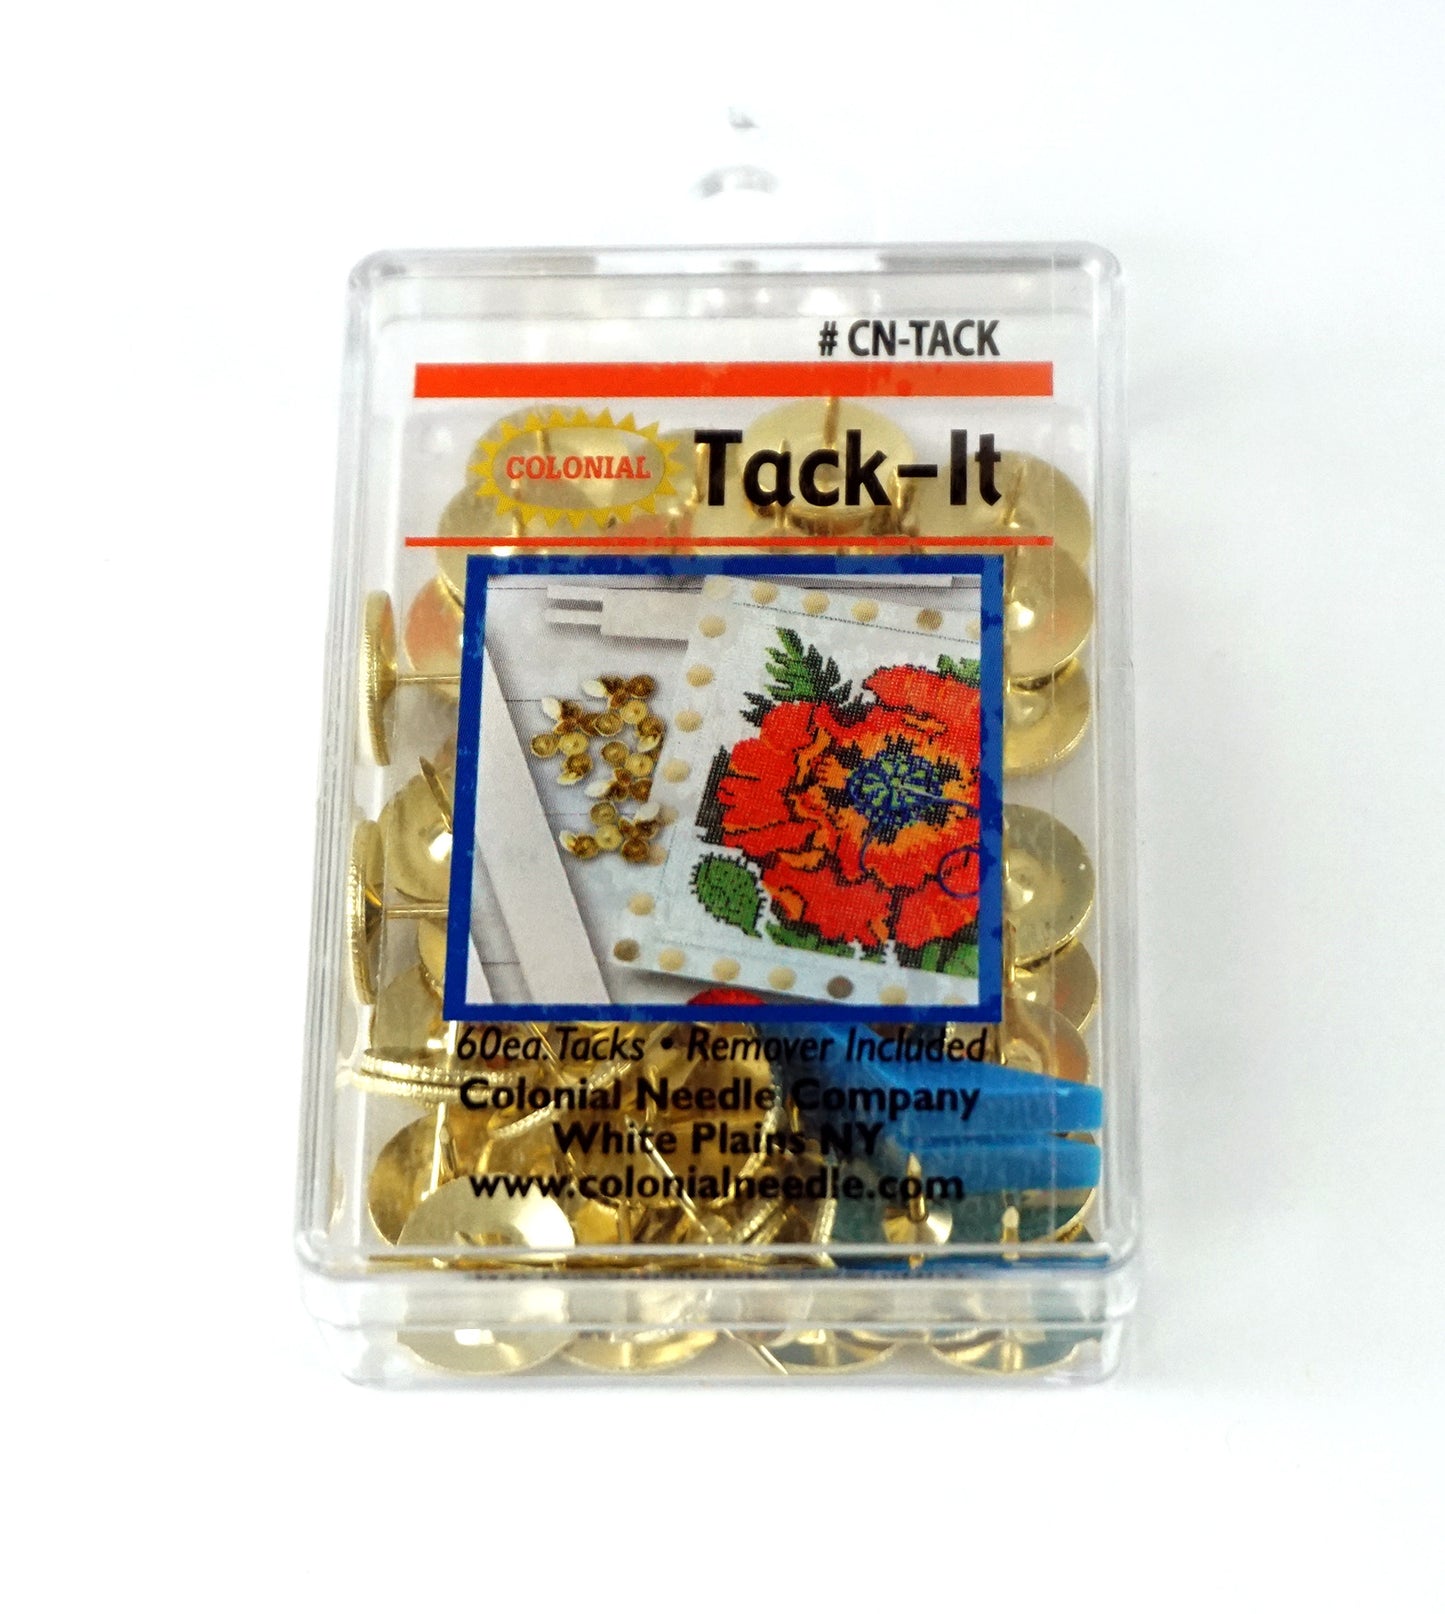 Brass Tacks with Remover & Case Non-rusting Thumb Tacks by Colonial for Needlepoint, Crafts, Sewing and X- Stitch